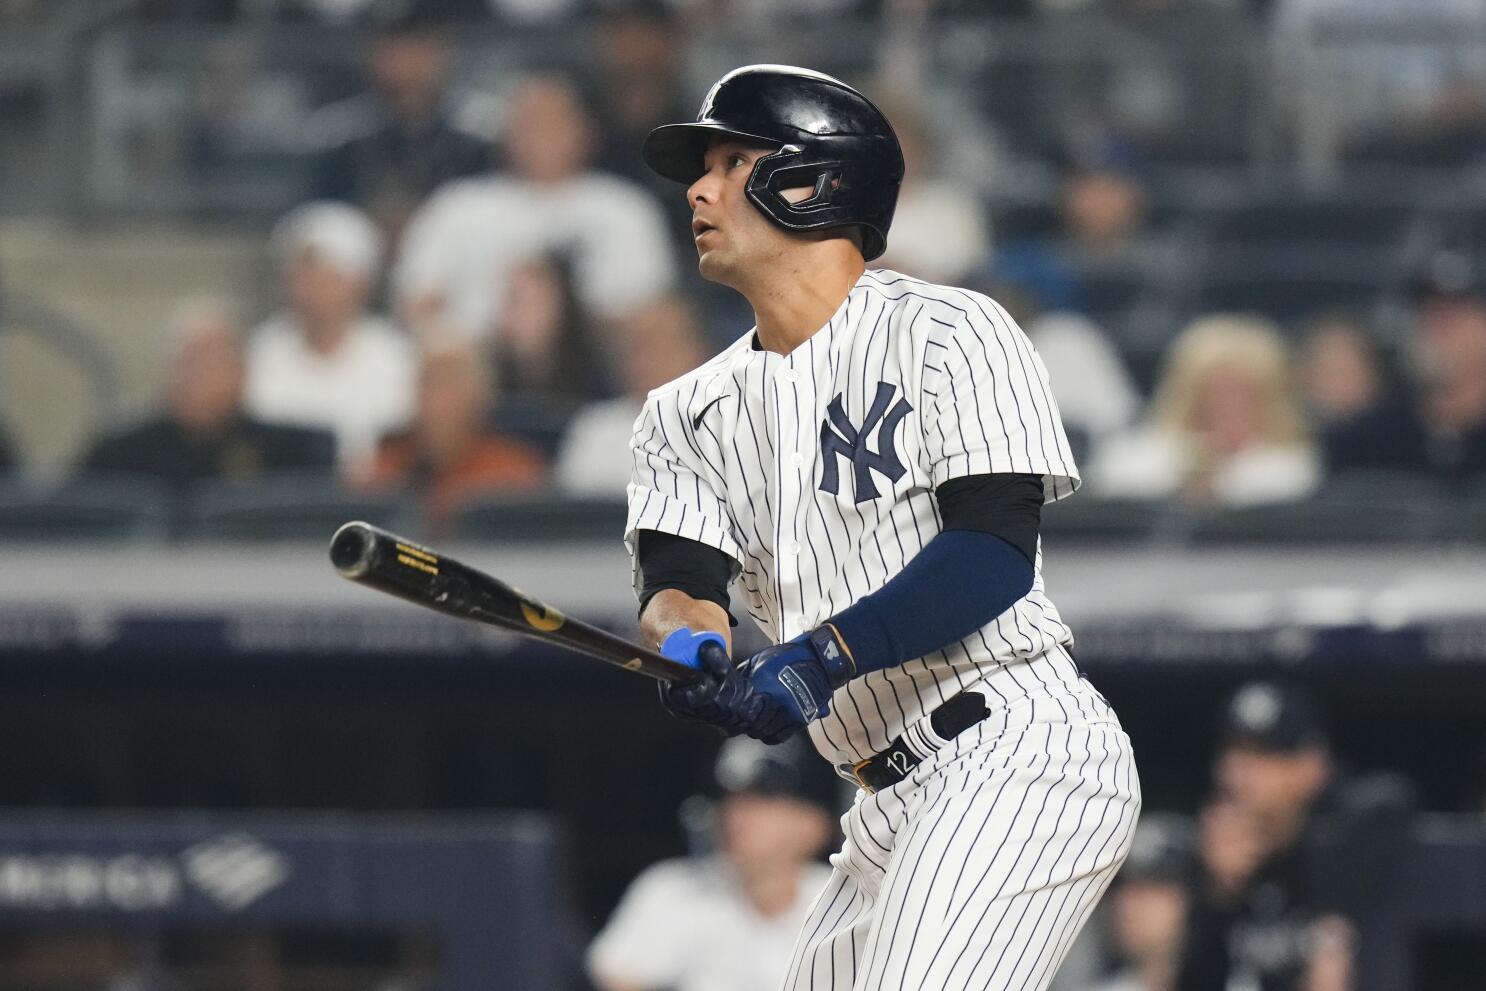 Kiner-Falefa's RBI double with 2 outs in 7th for Yankees breaks up